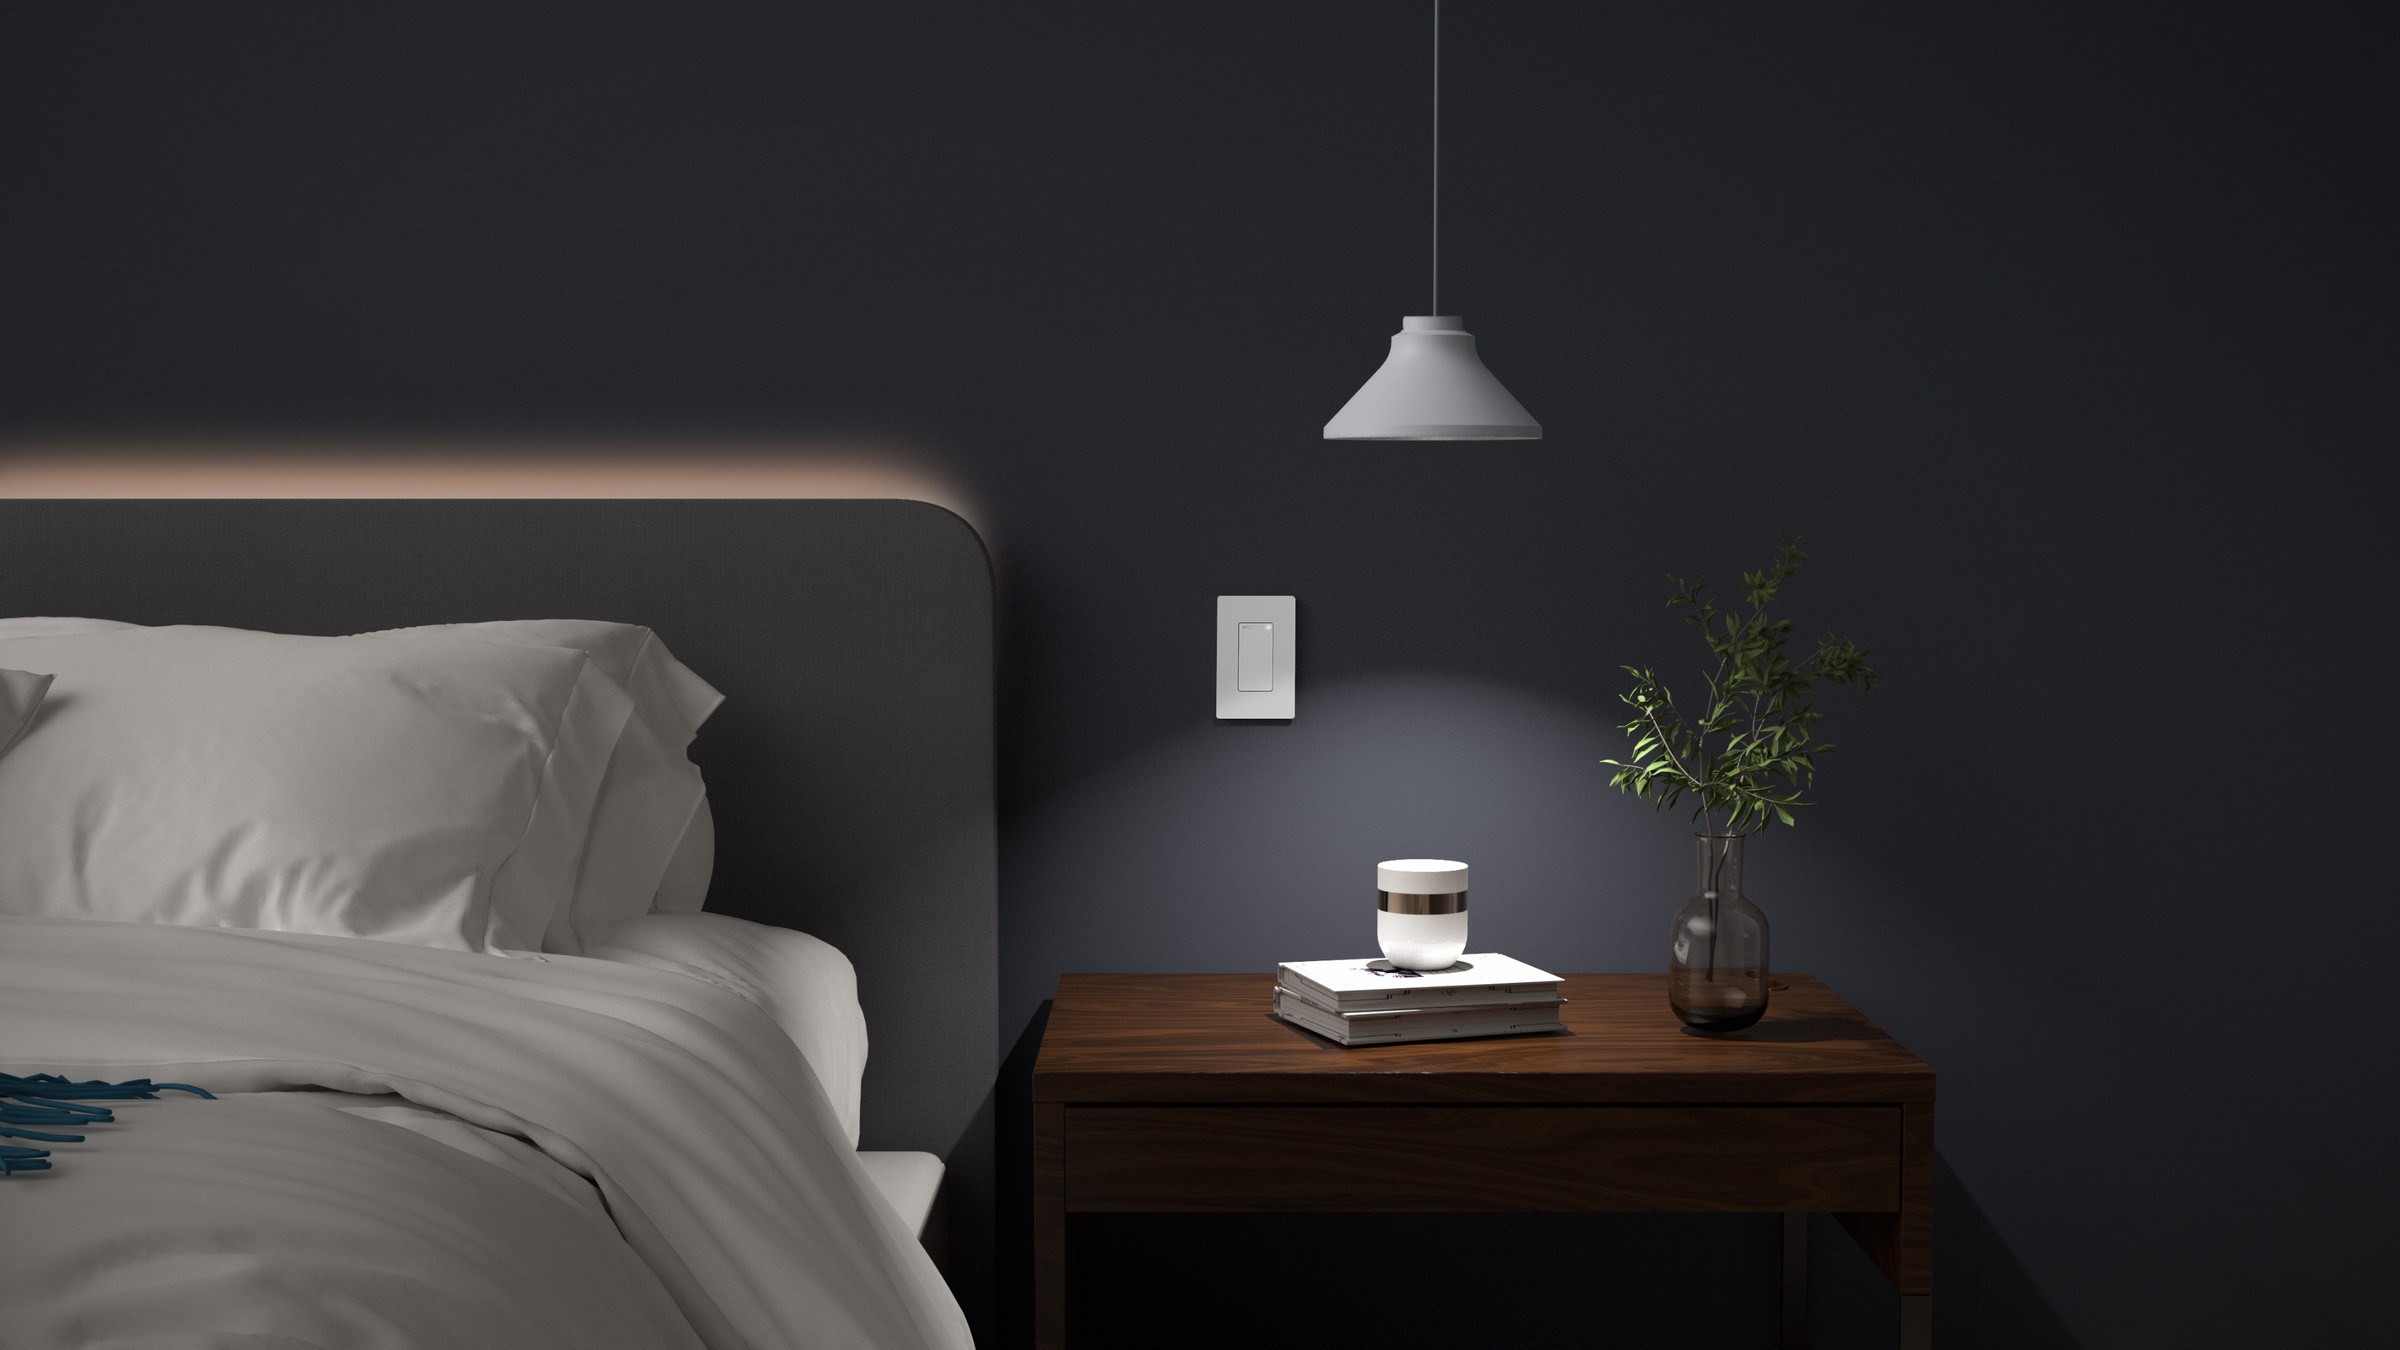 The new Wyze Smart Switch doubles as a smart home controller for other Wyze products.